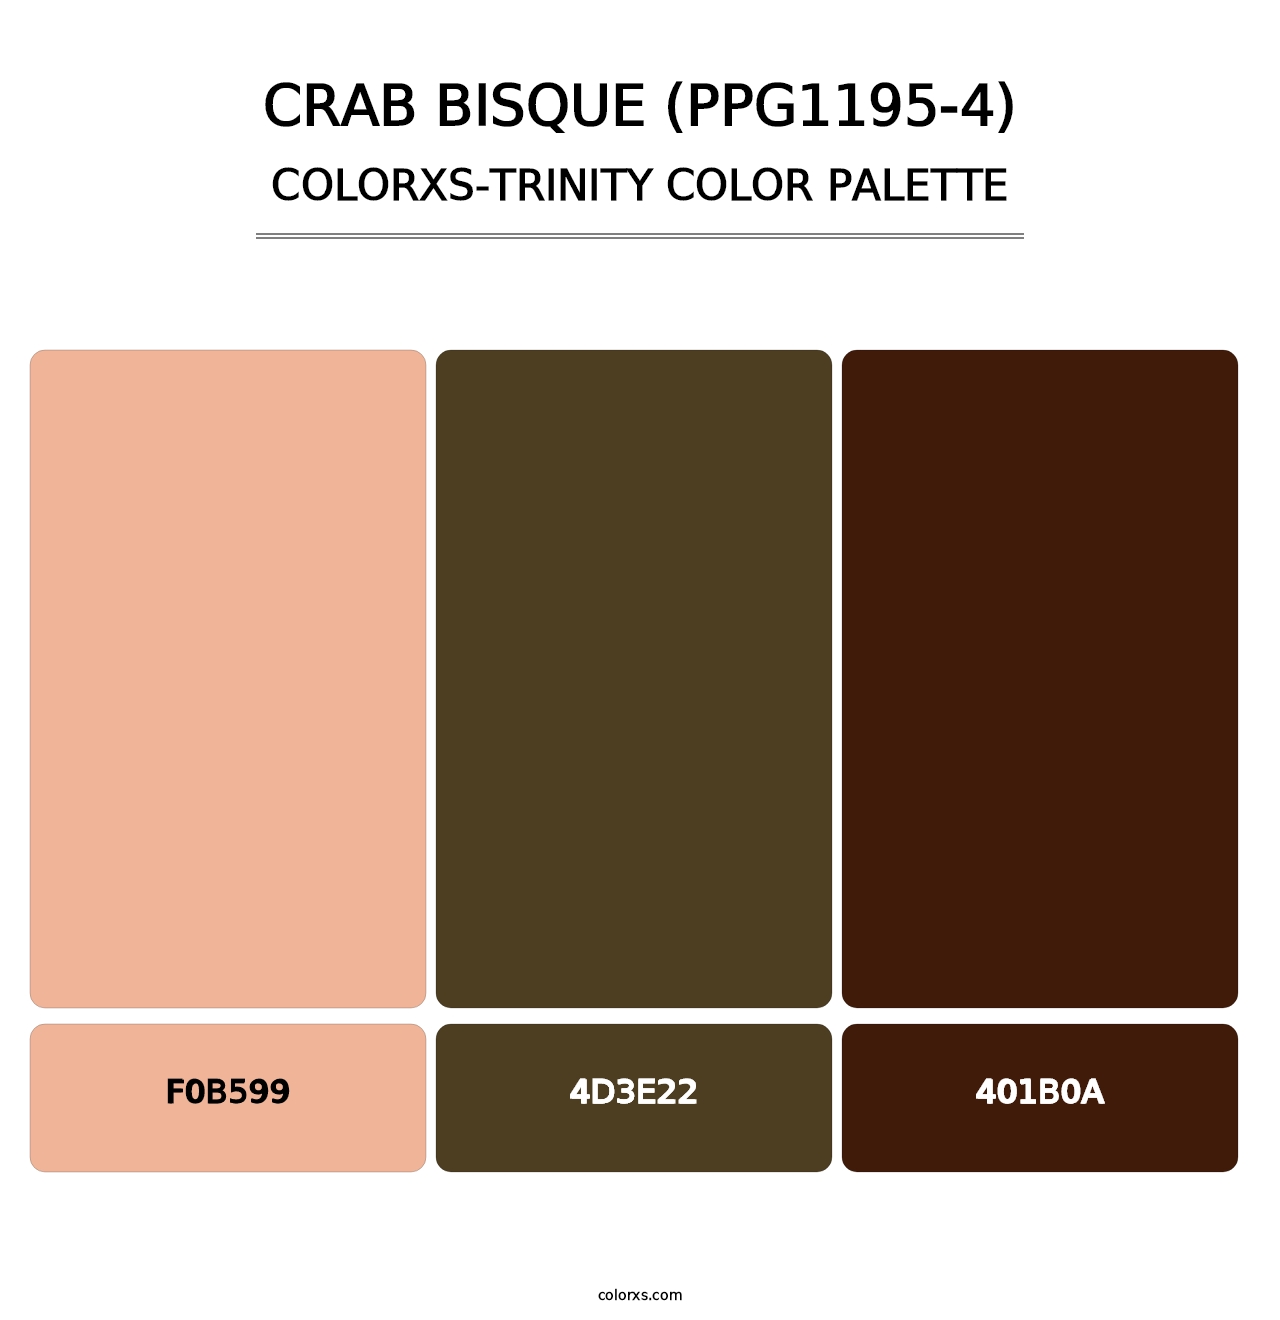 Crab Bisque (PPG1195-4) - Colorxs Trinity Palette